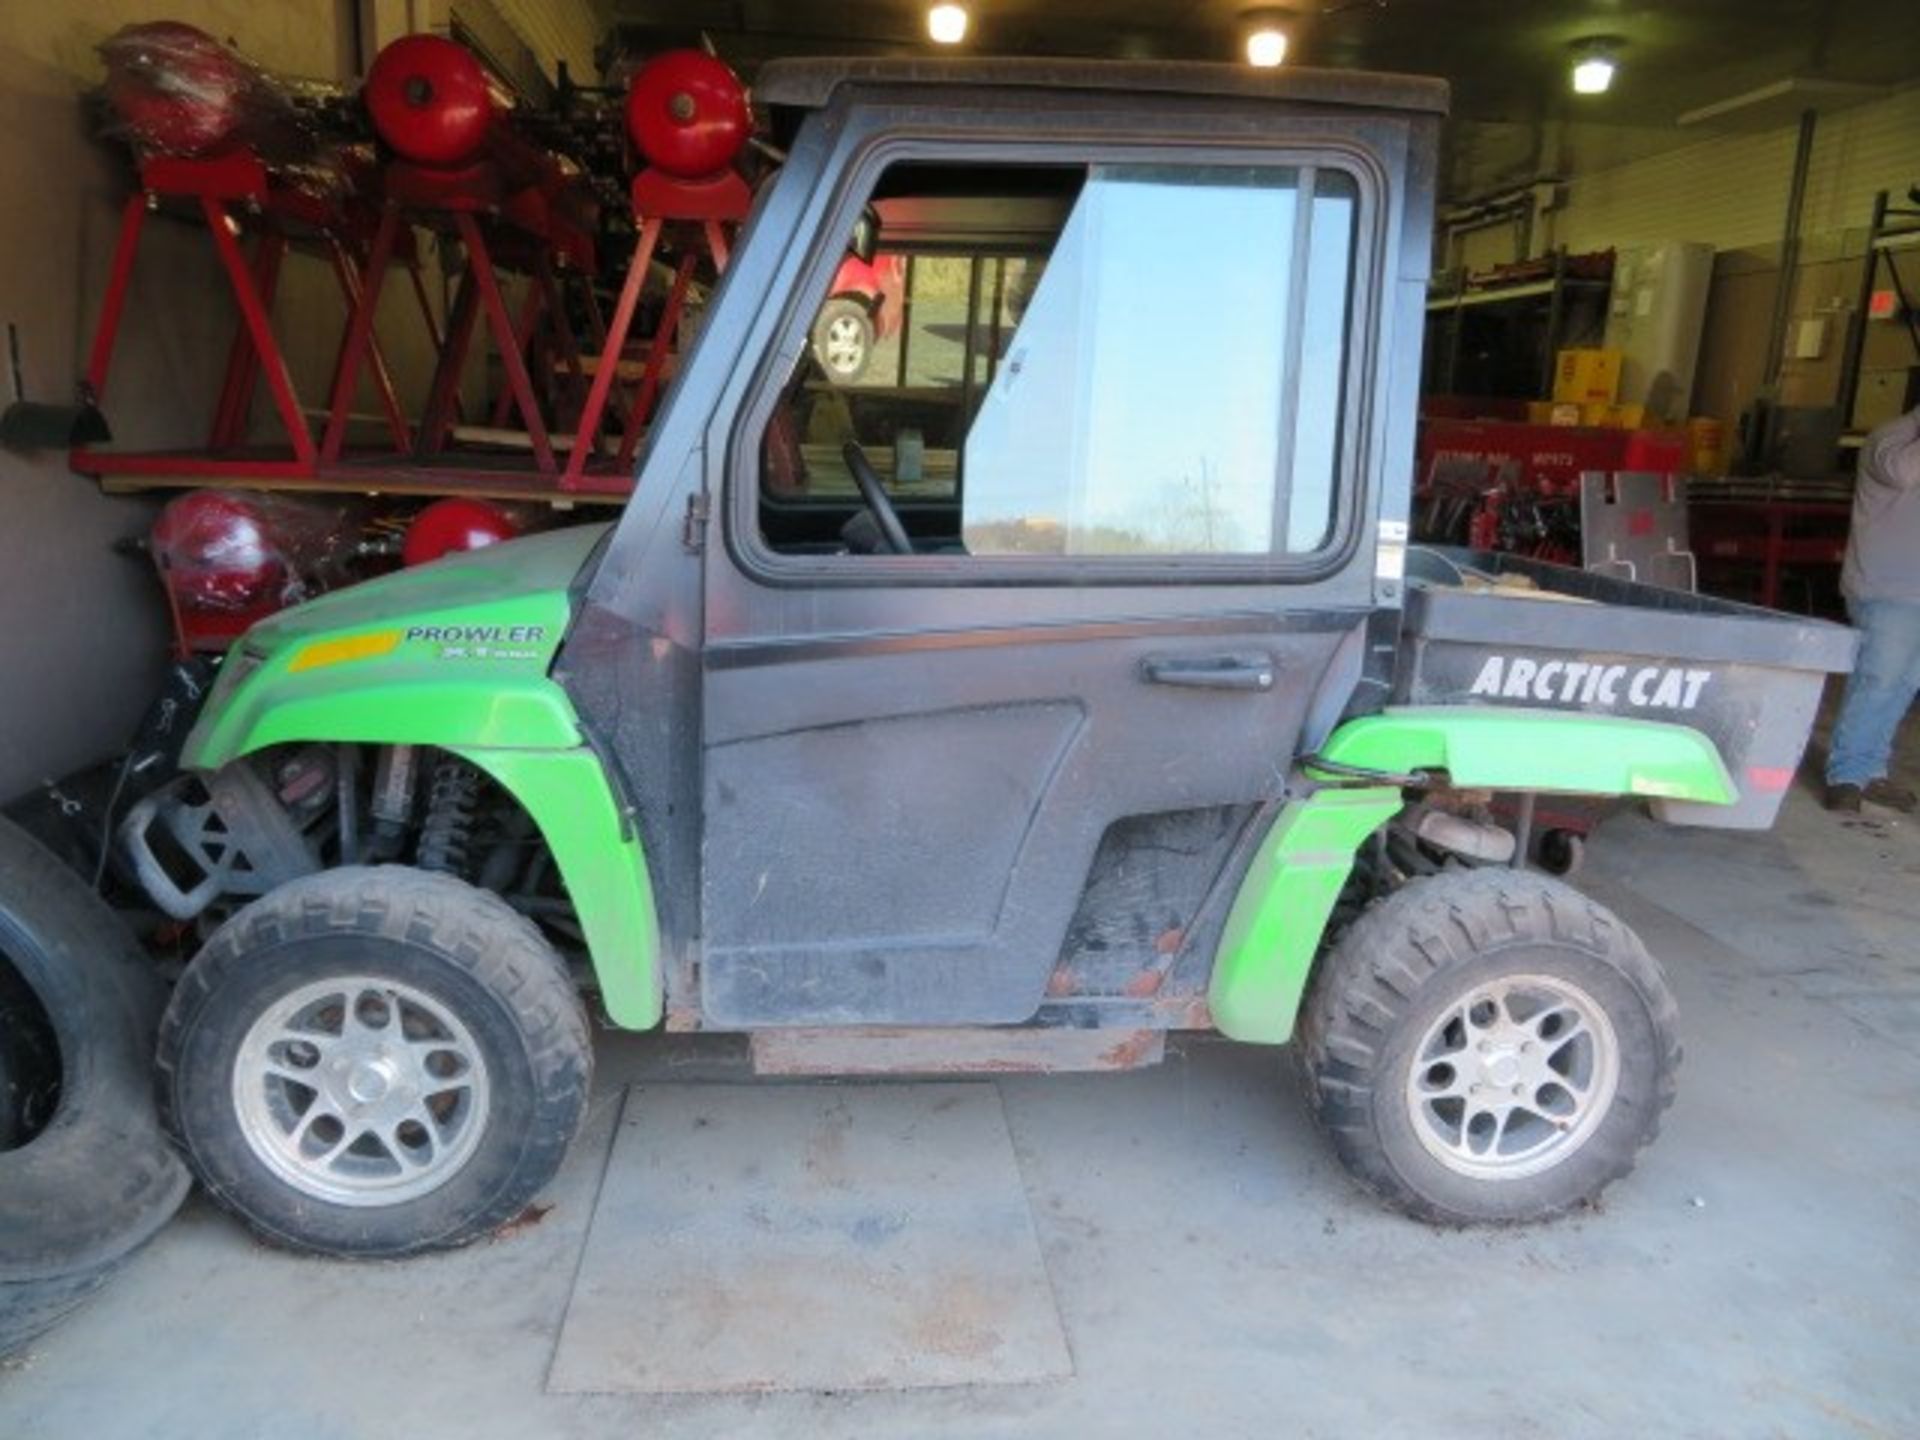 2009 ARCTIC CAT PROWLER XT 650 W/ CURTIS SNOW PLOW W/ CONTROL, ENCLOSED CAB & POLY PICK UP BED - Image 5 of 5